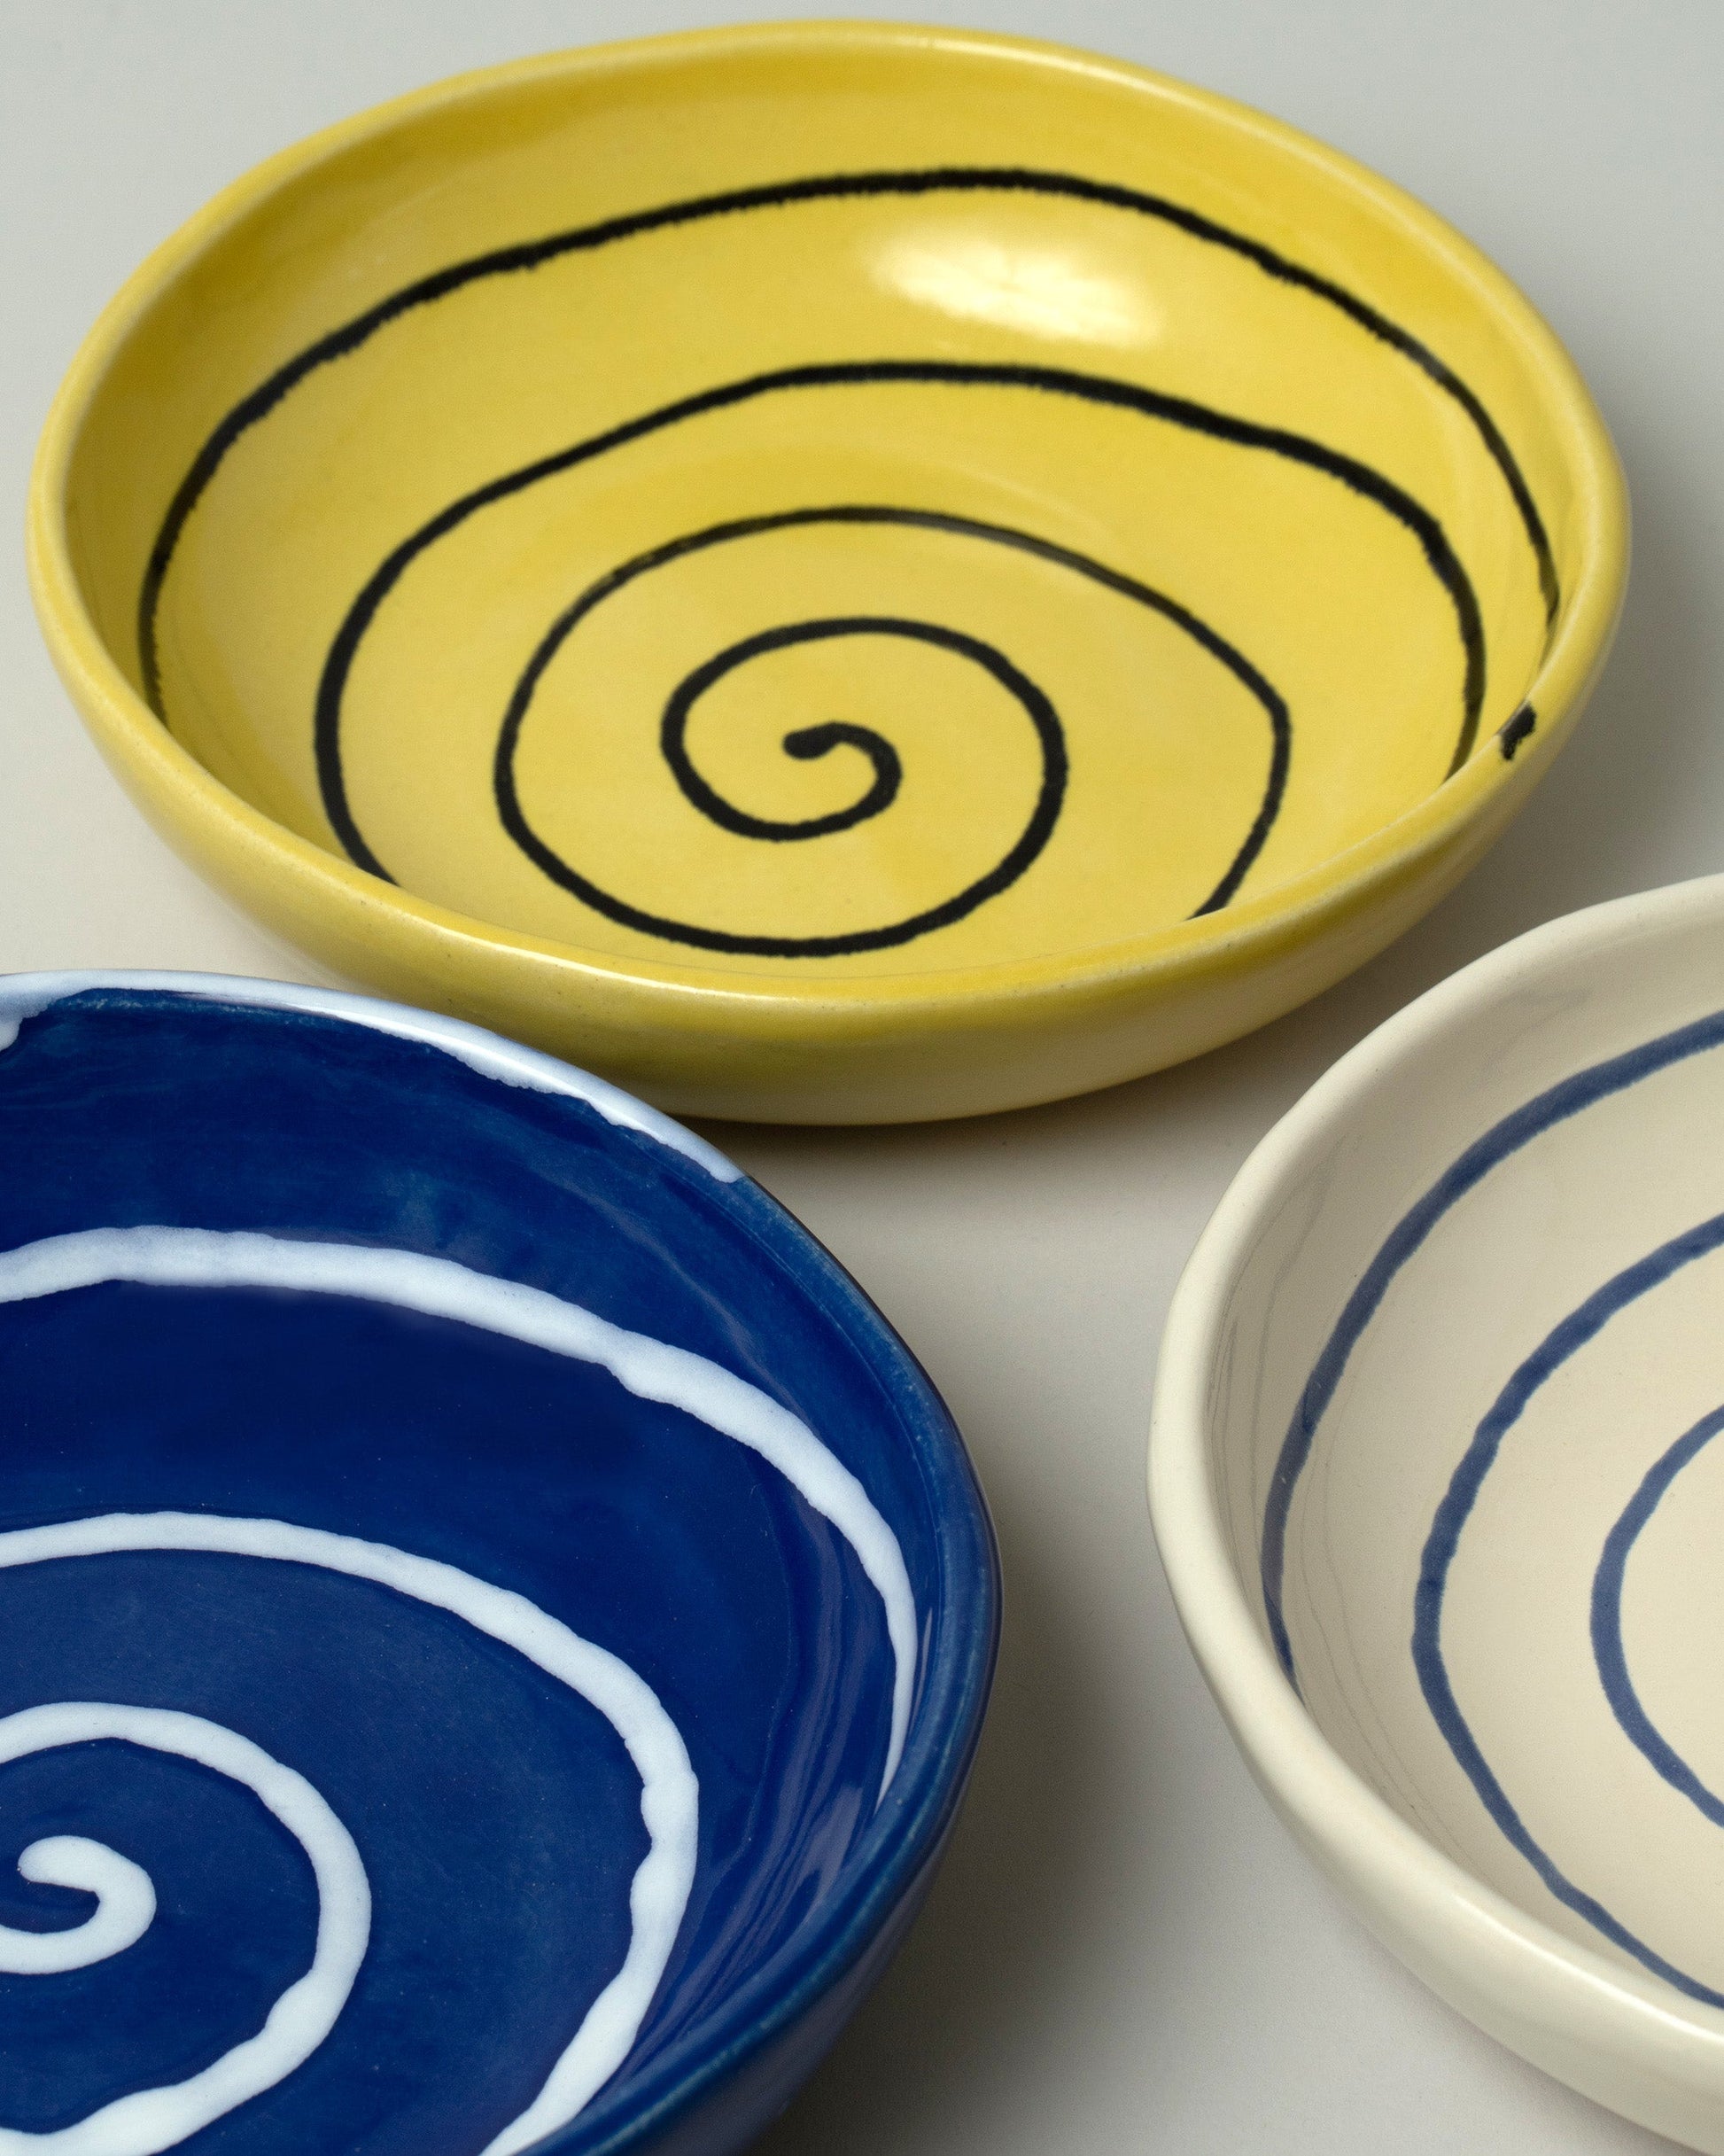 Closeup details of a group of Casa Veronica Azul, Sol and Leche Vida Bowls on light color background.